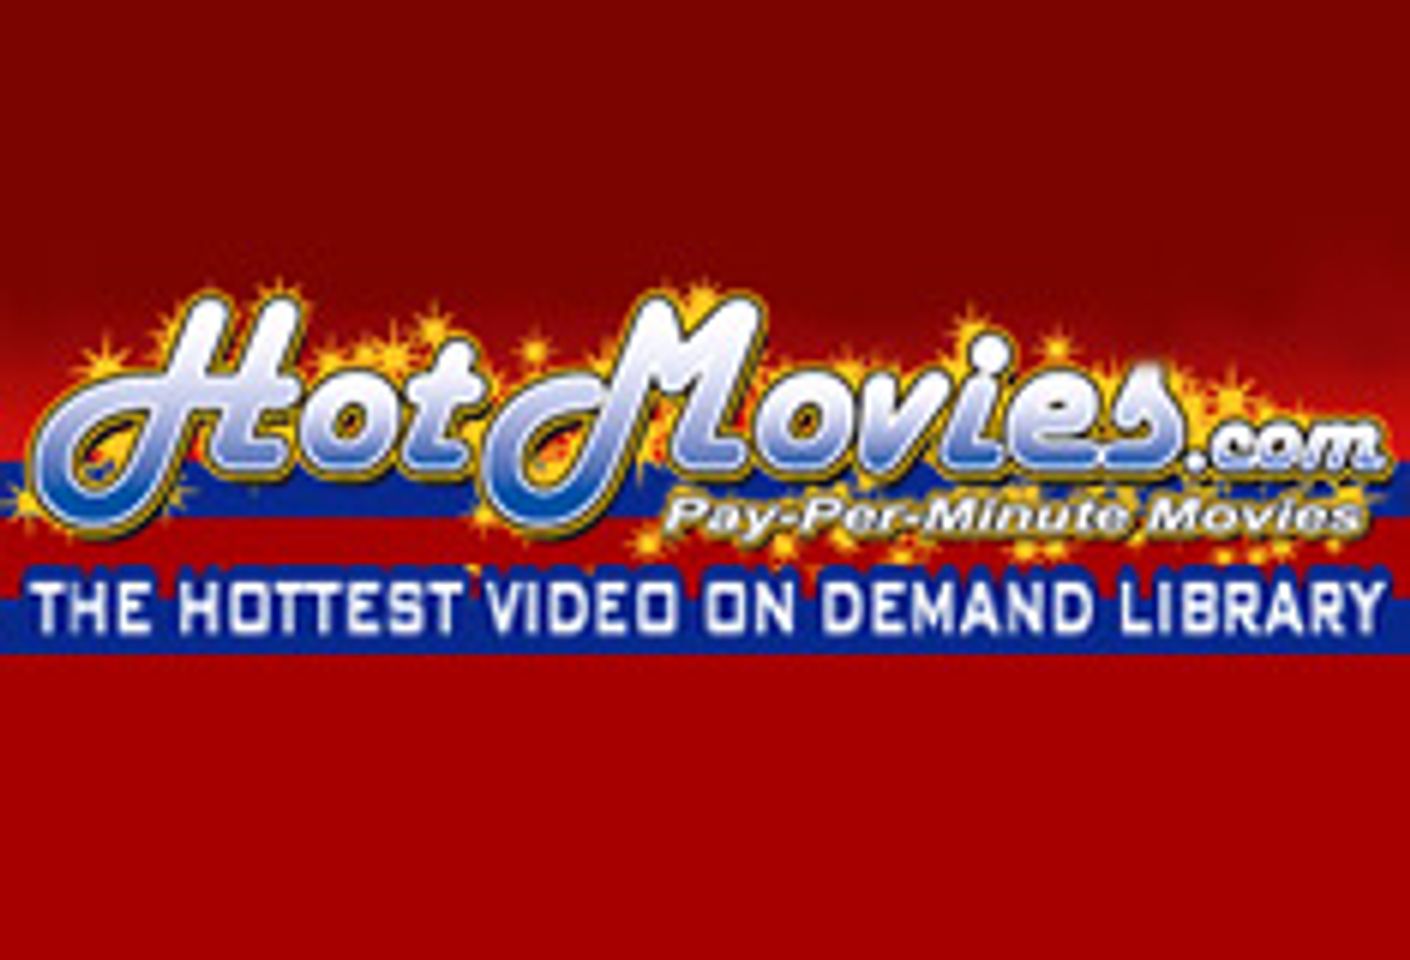 HotMovies.com Doubling Webmaster Payouts